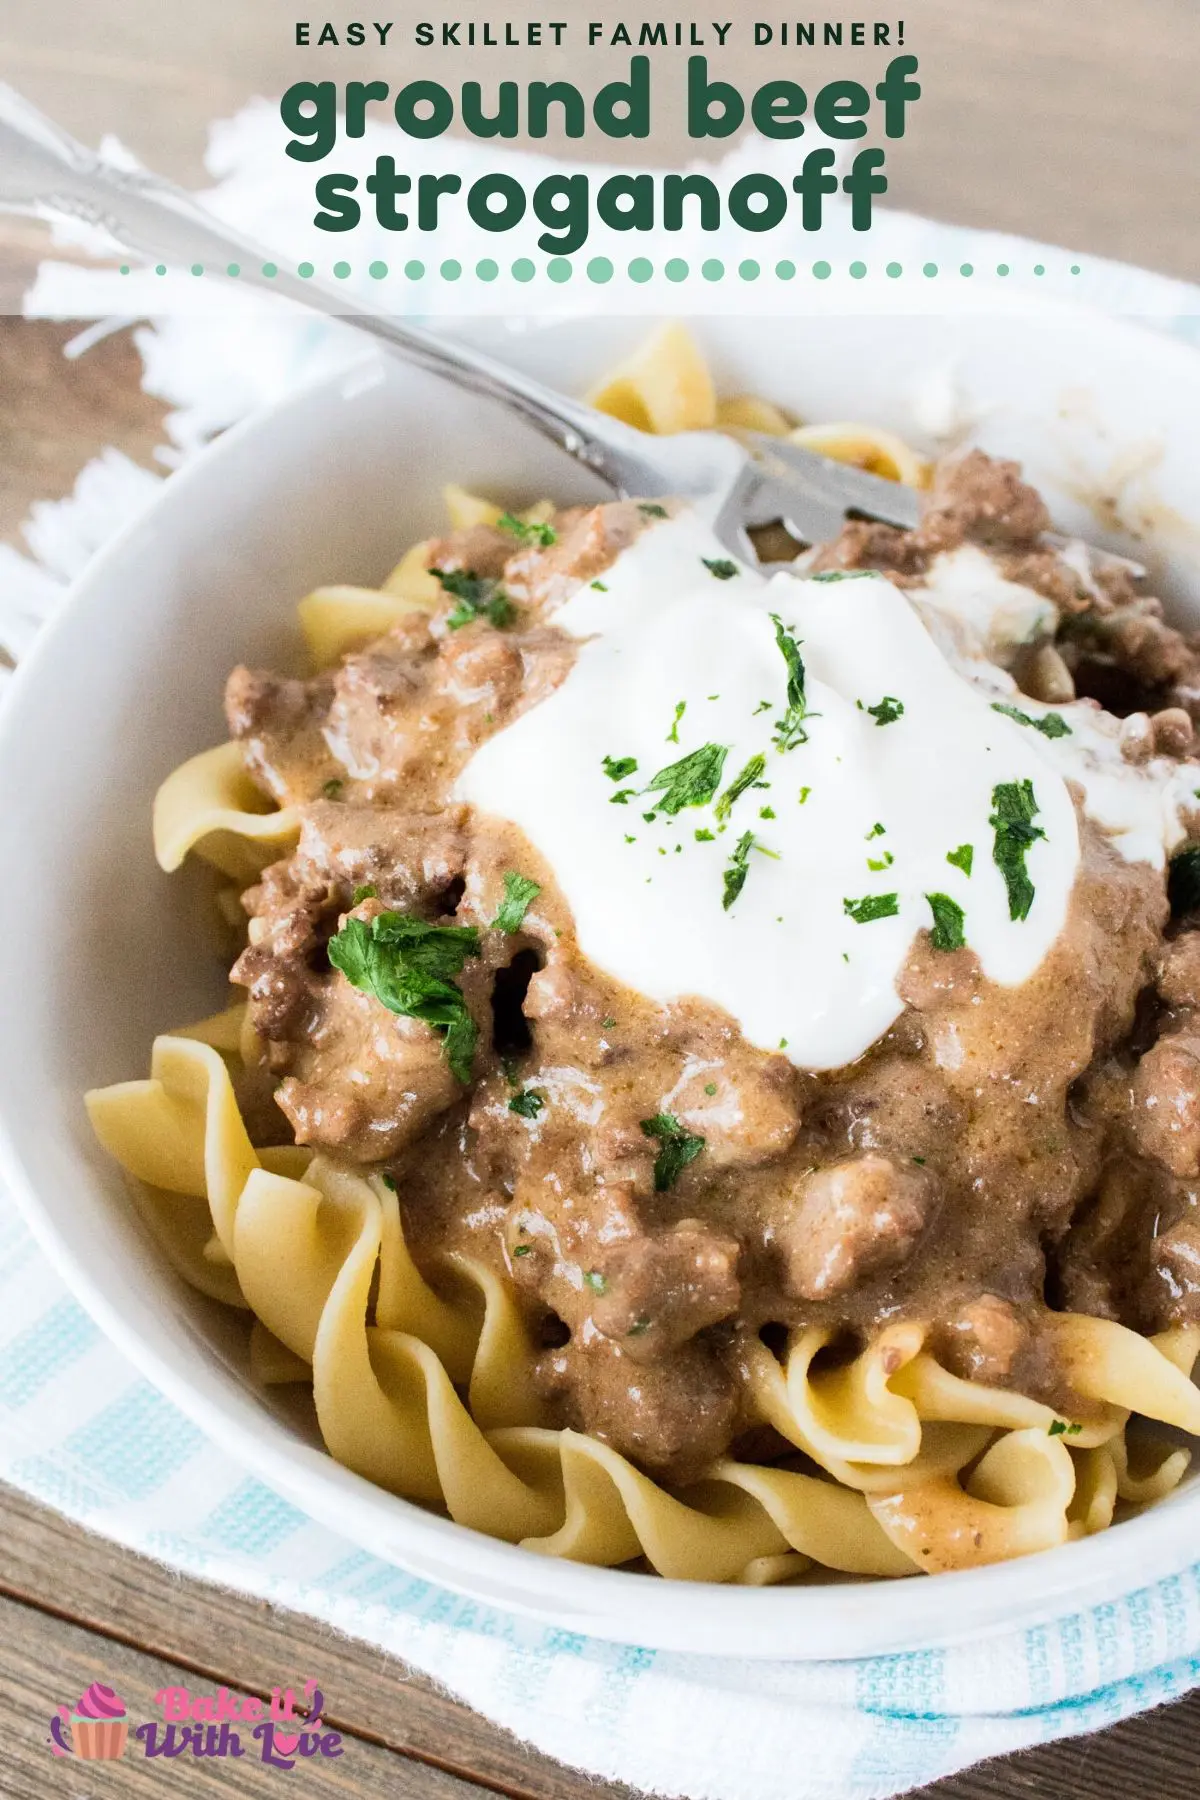 Hearty ground beef stroganoff served in white dish with sour cream dollop and parsley garnish on top.